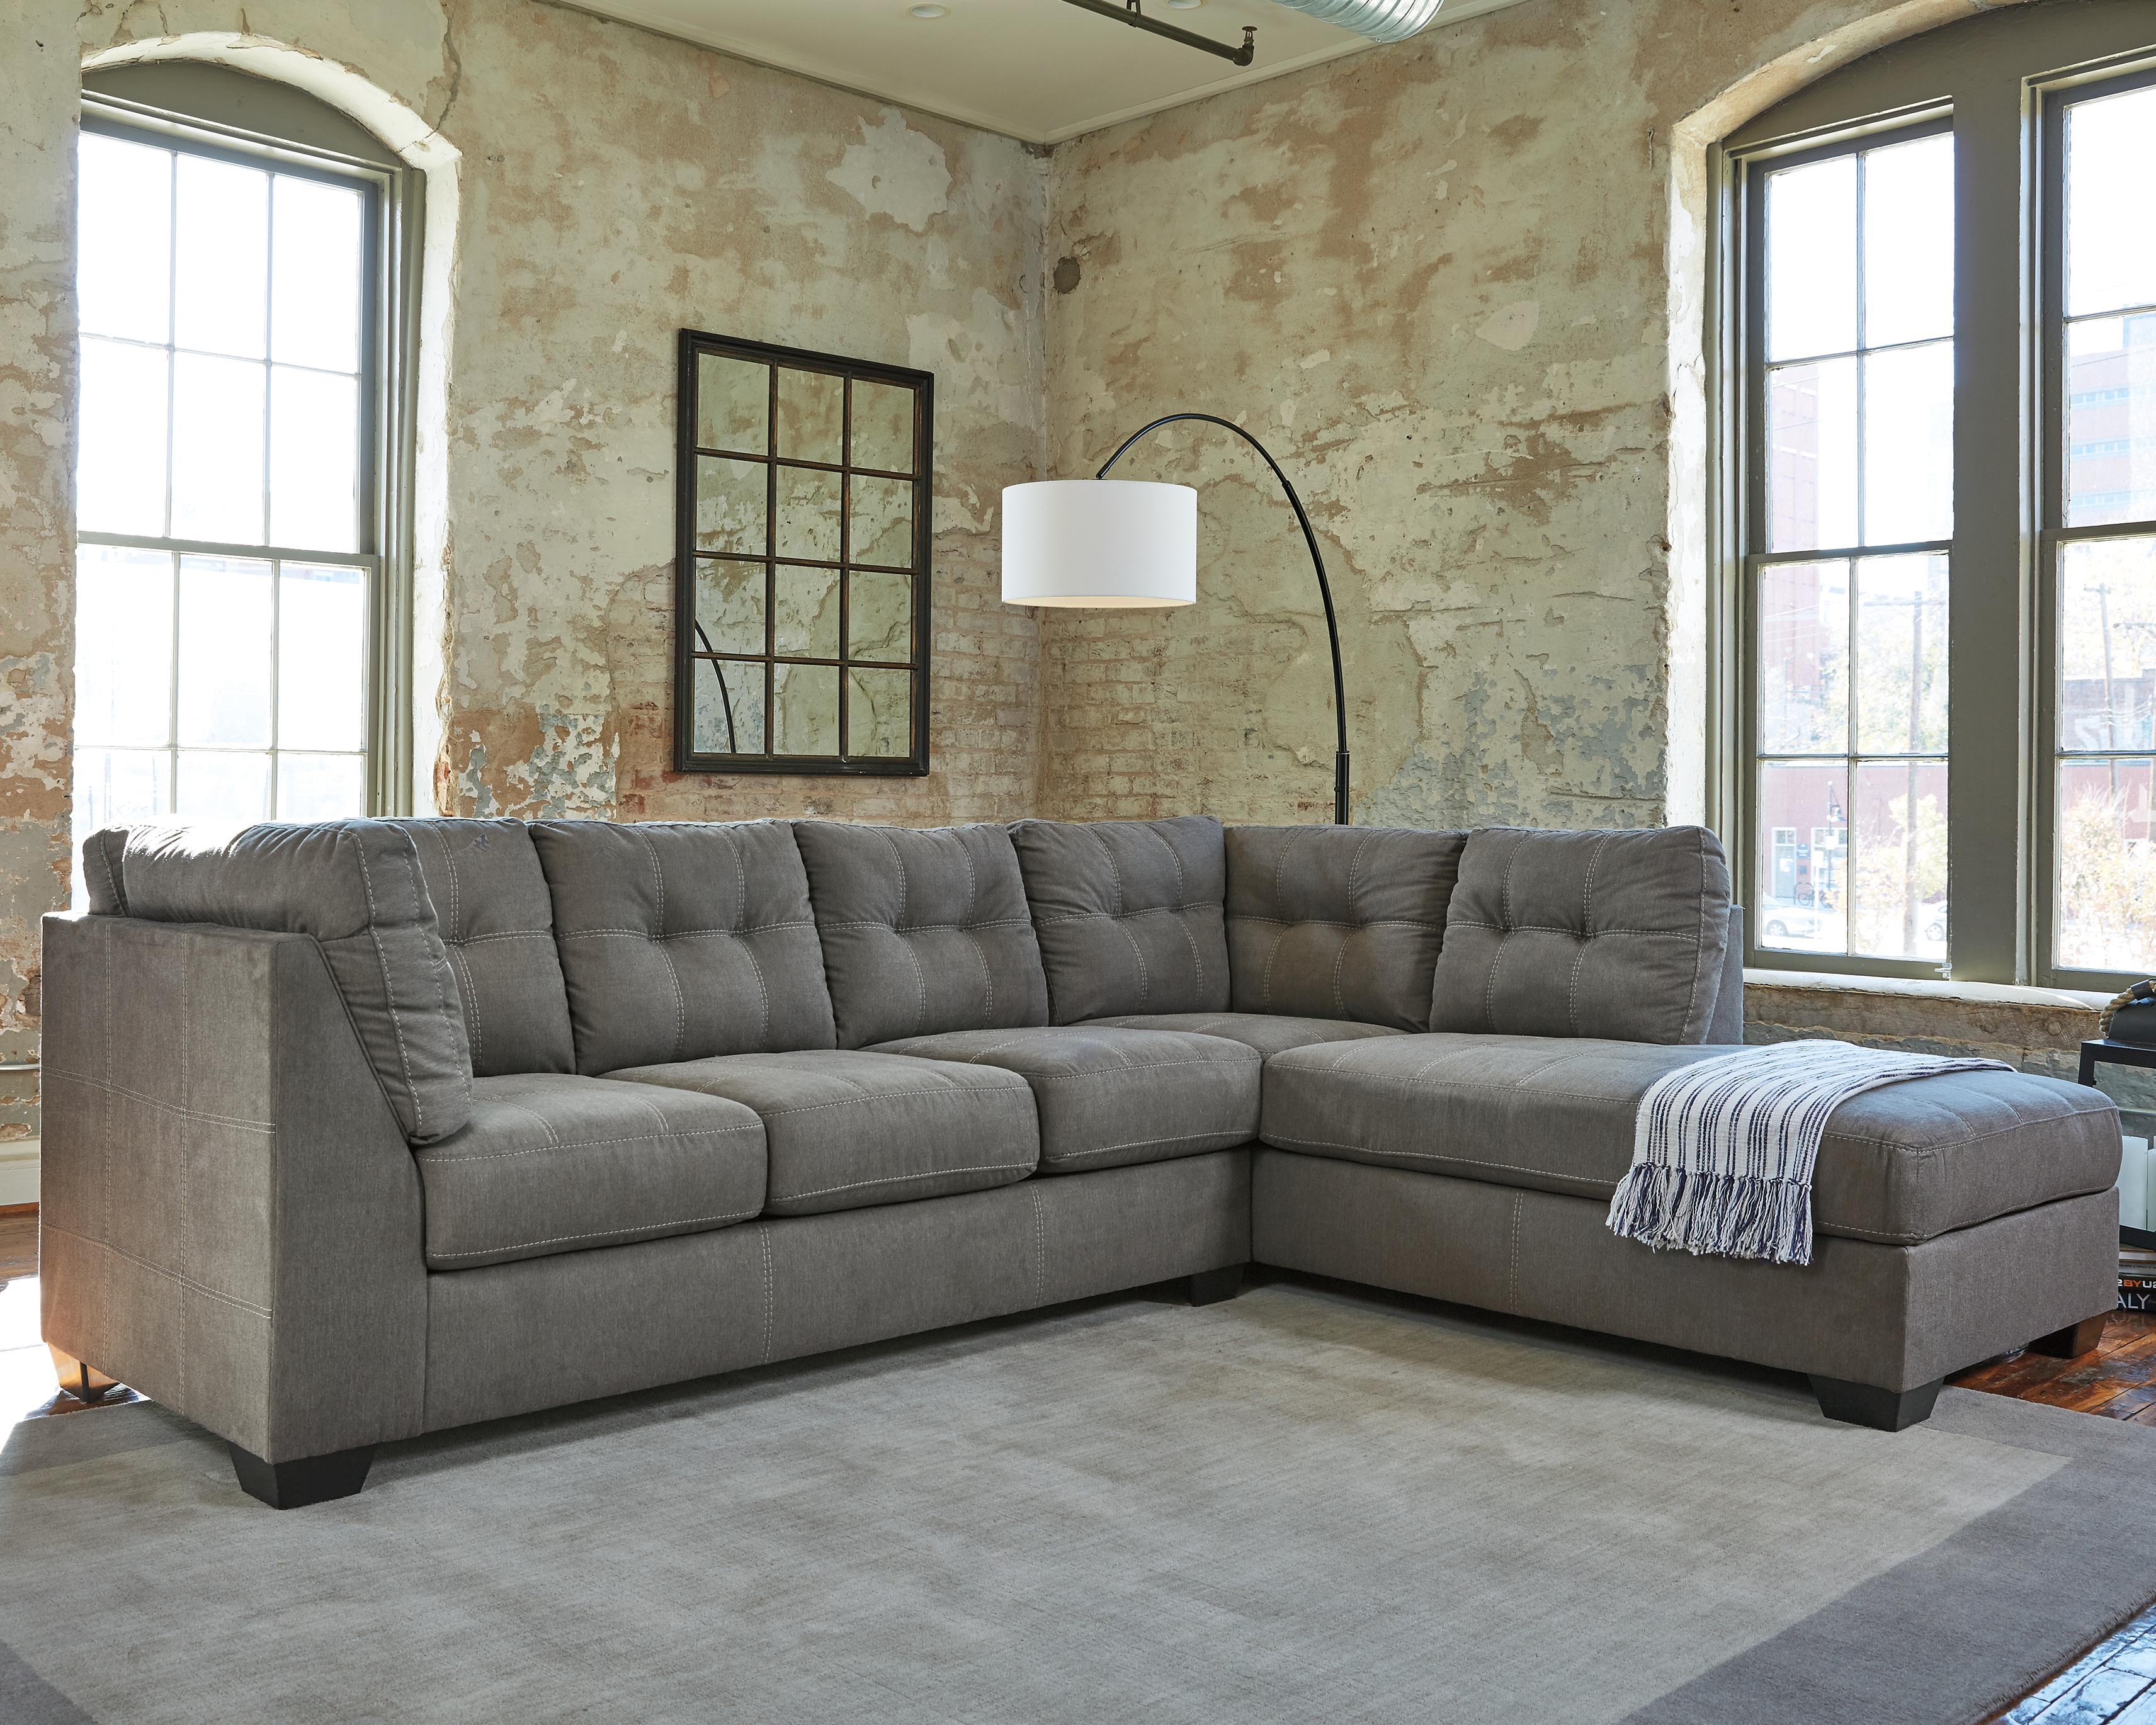 Pitkin 2 Piece Sectional With Chaise